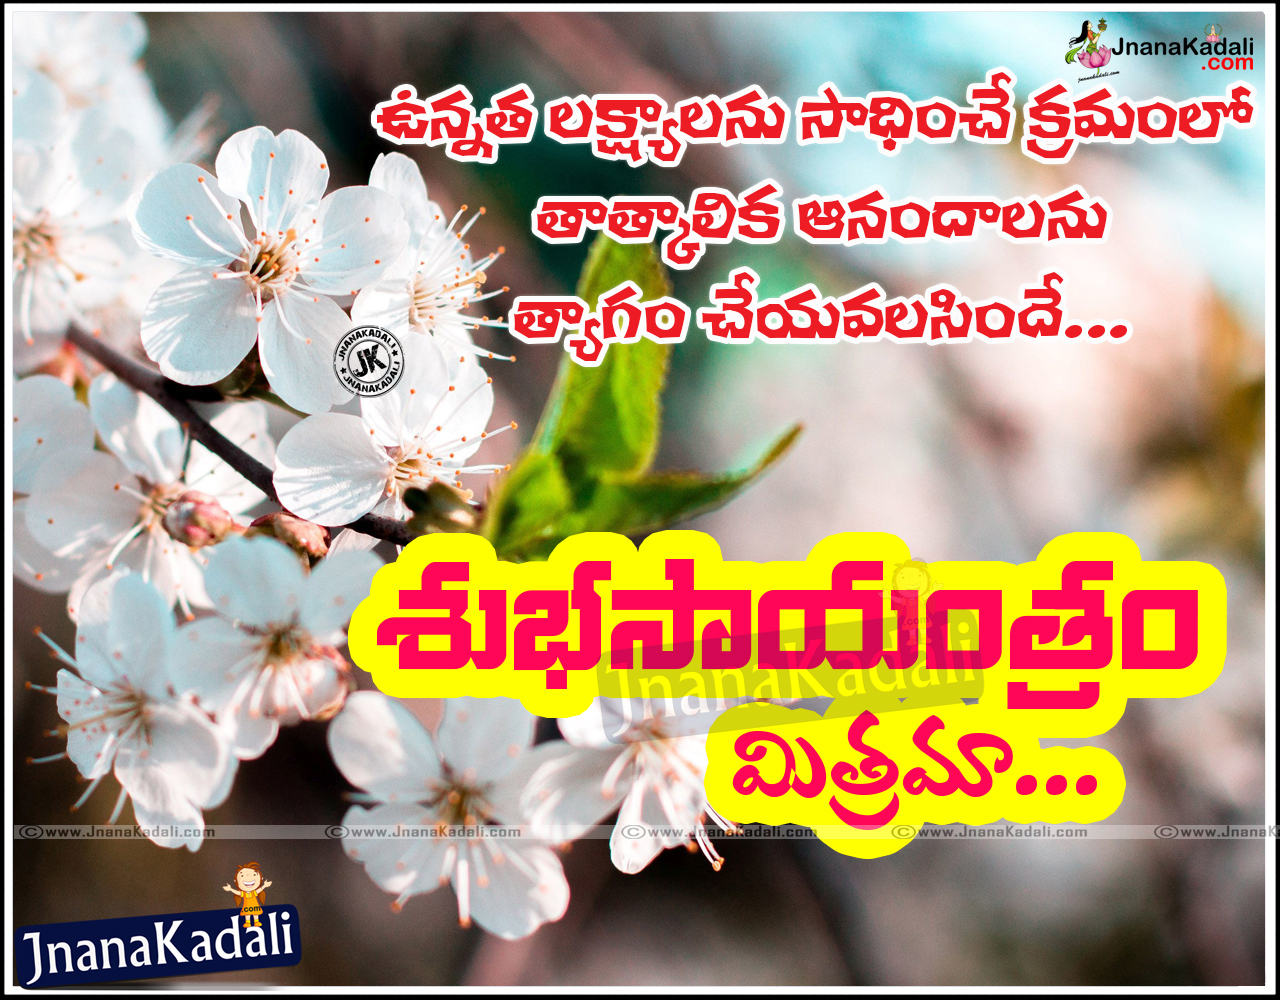 Here is a Good Evening Telugu sms to Friend Telugu Life Goals Quotes and & Good Evening Wishes s GOOD EVENING HD WALLPAPERS Top Trending Telugu